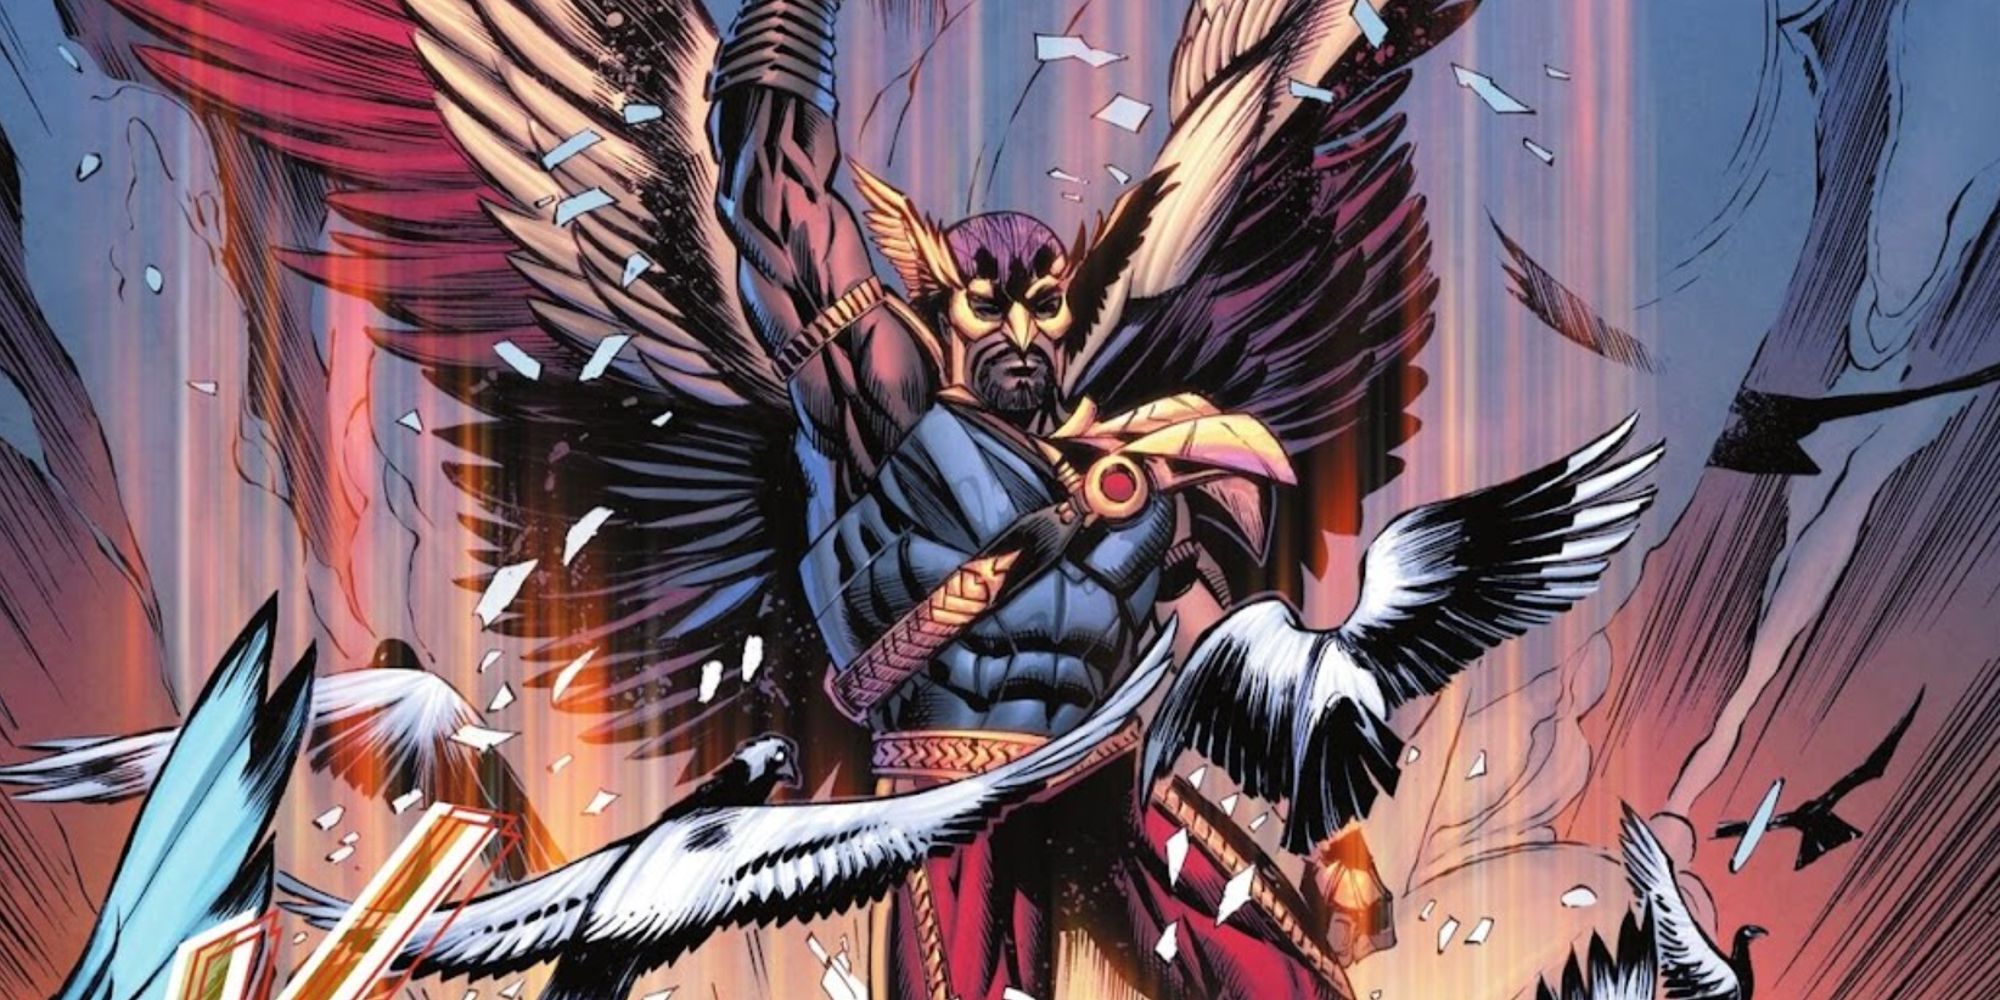 Hawkman flying through a roof in The Justice Society Files Hawkman #1